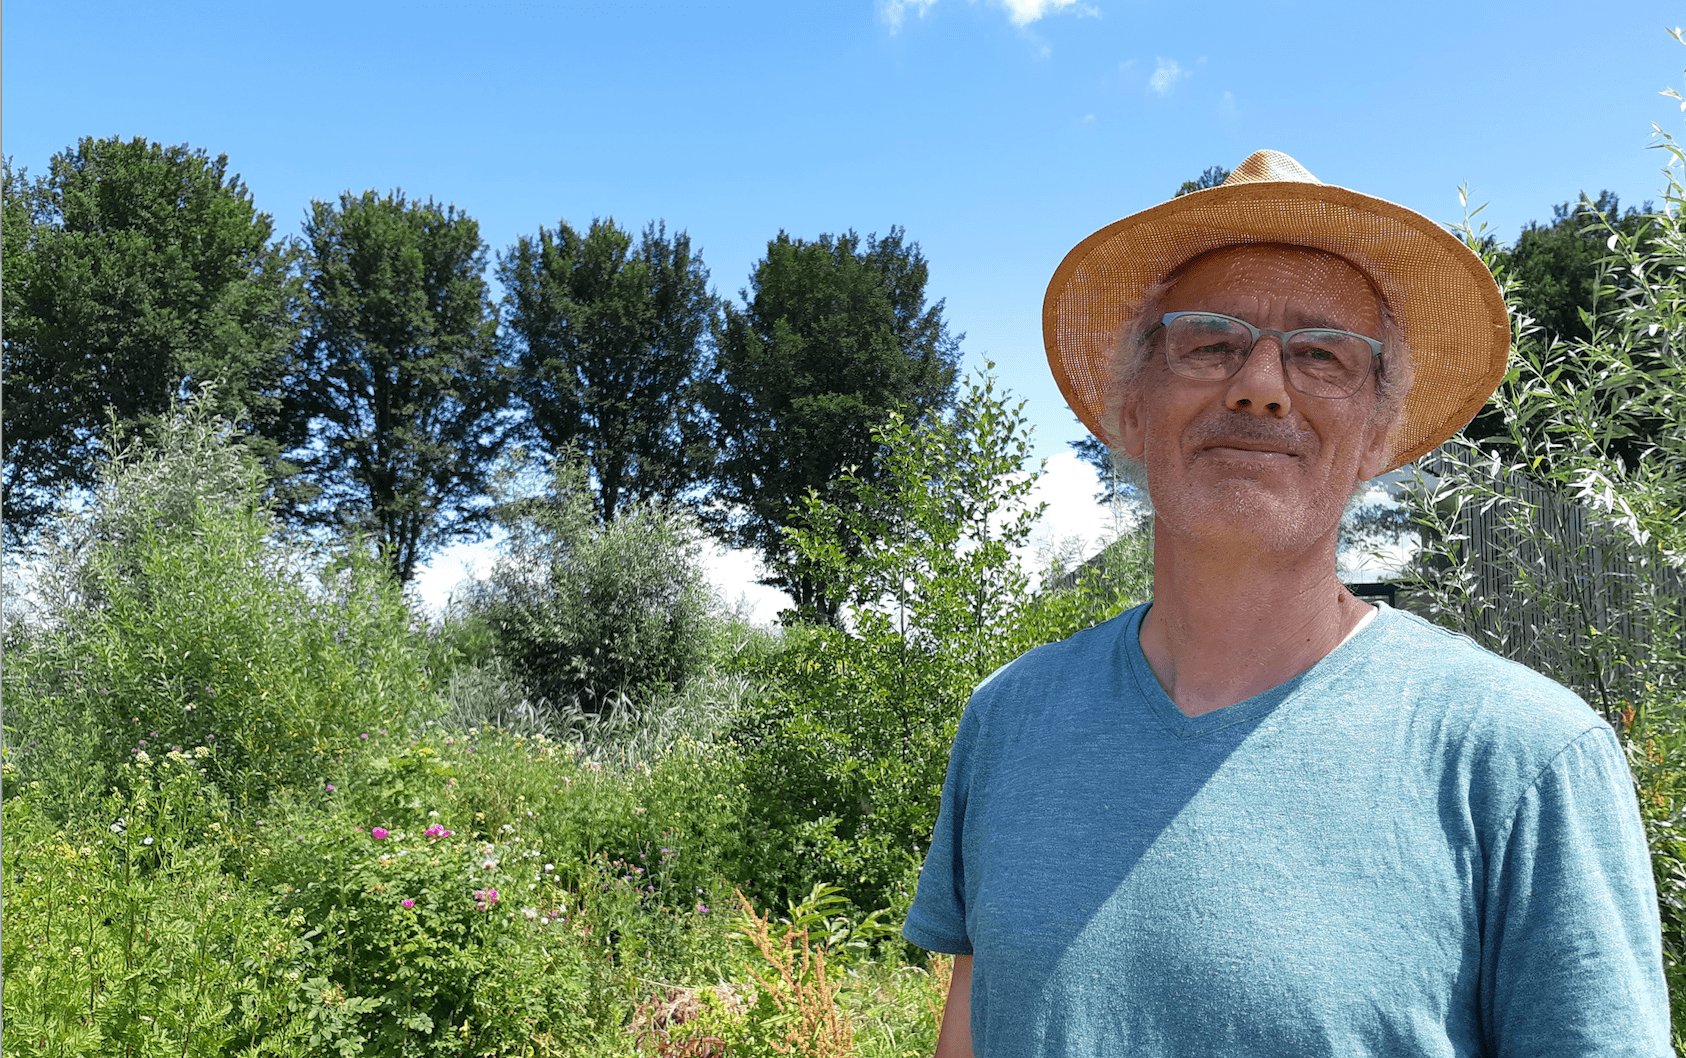 Marien Abspoe and agroforestry: a model that fosters the regeneration of biodiversity